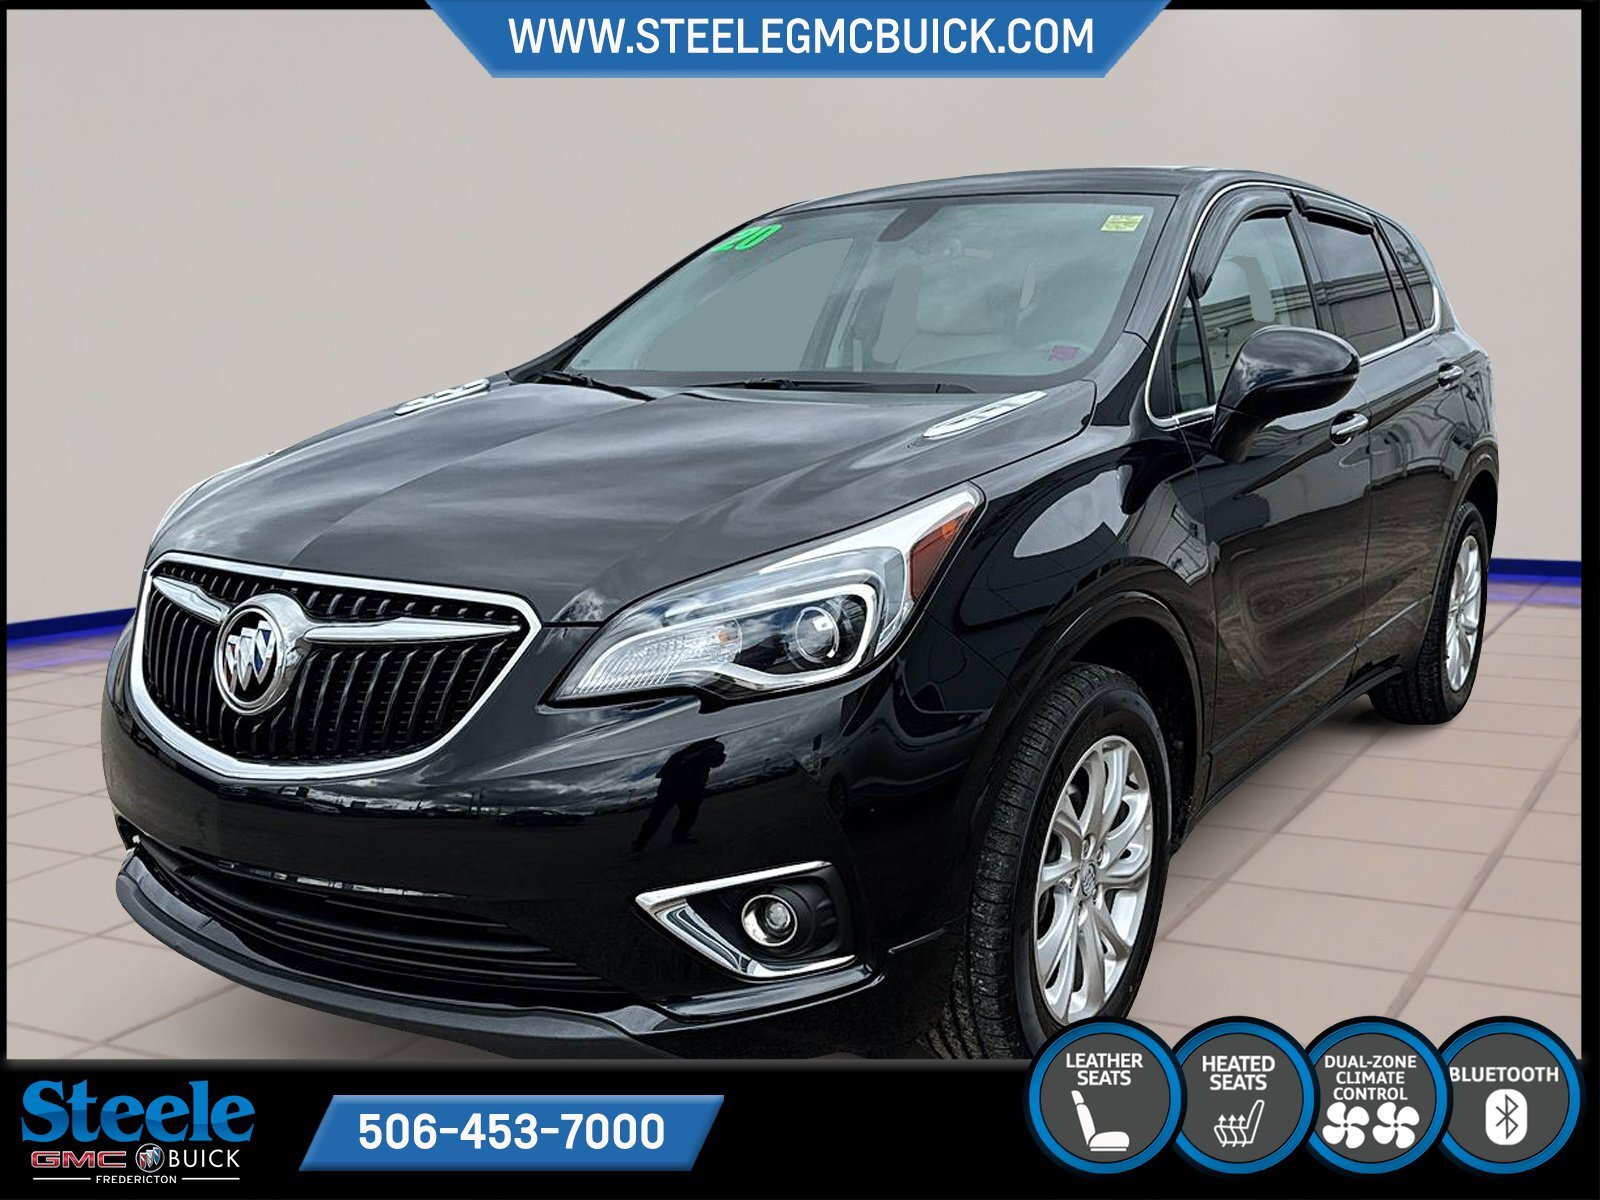 2020 Buick Envision | LOW MILEAGE | FPR SALE IN STEELE GMC FREDERICTON